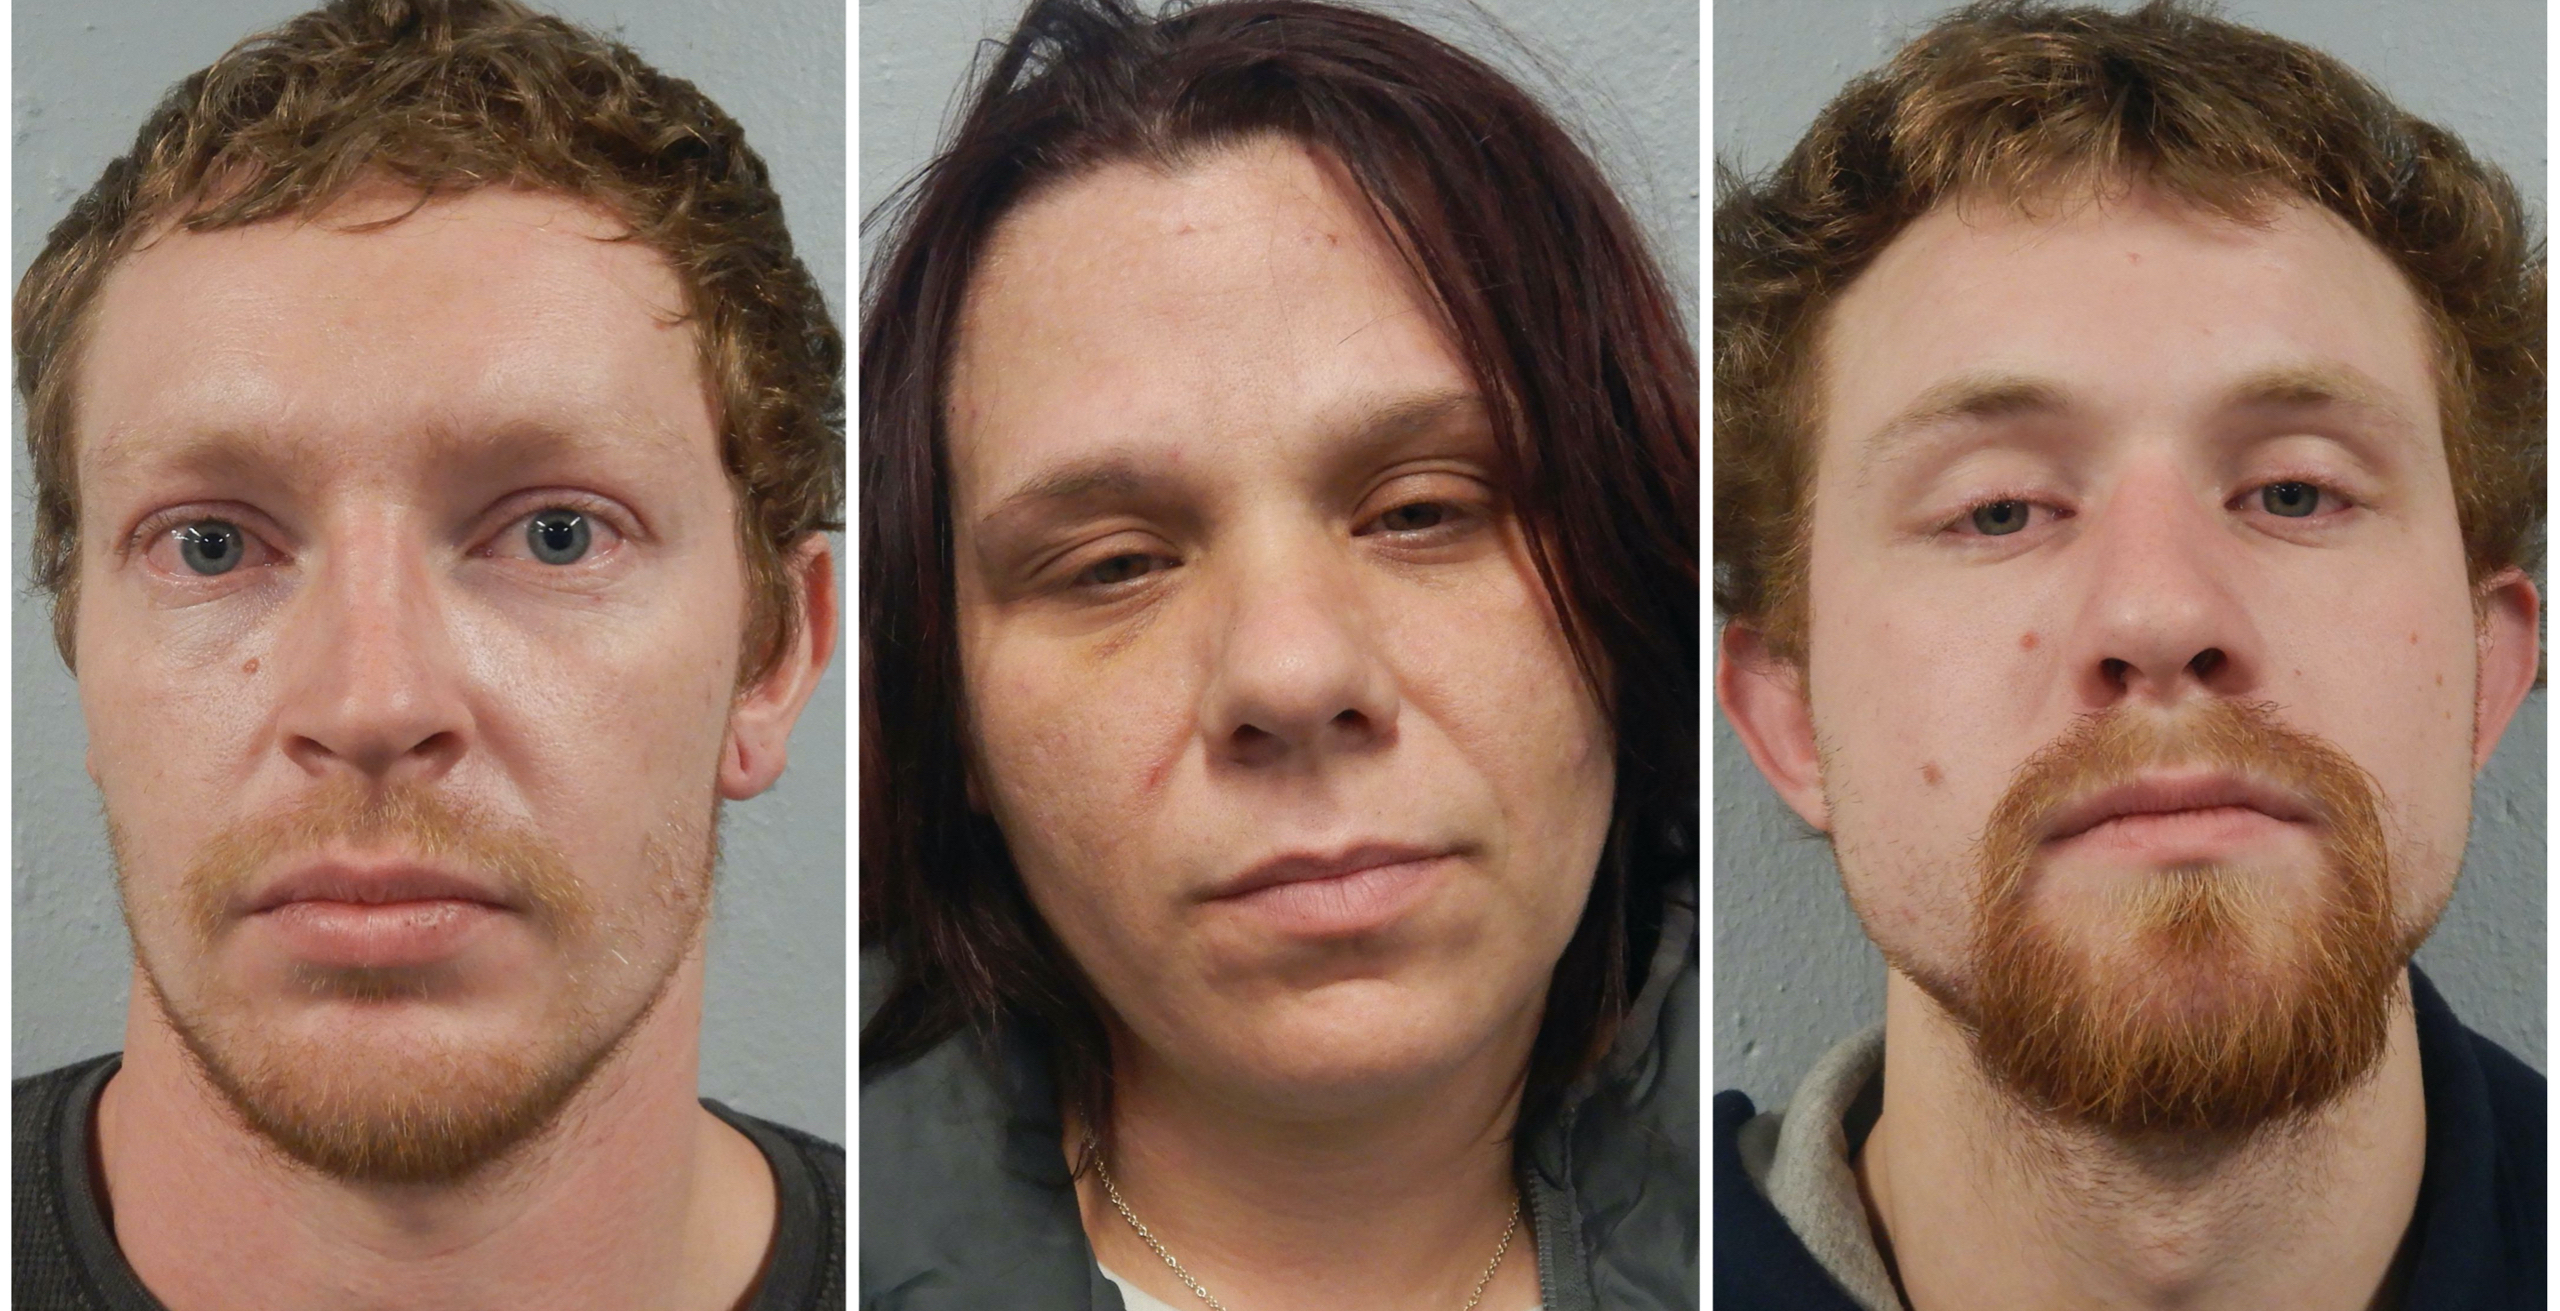 Three arrested in Hannibal after attempted burglary of home